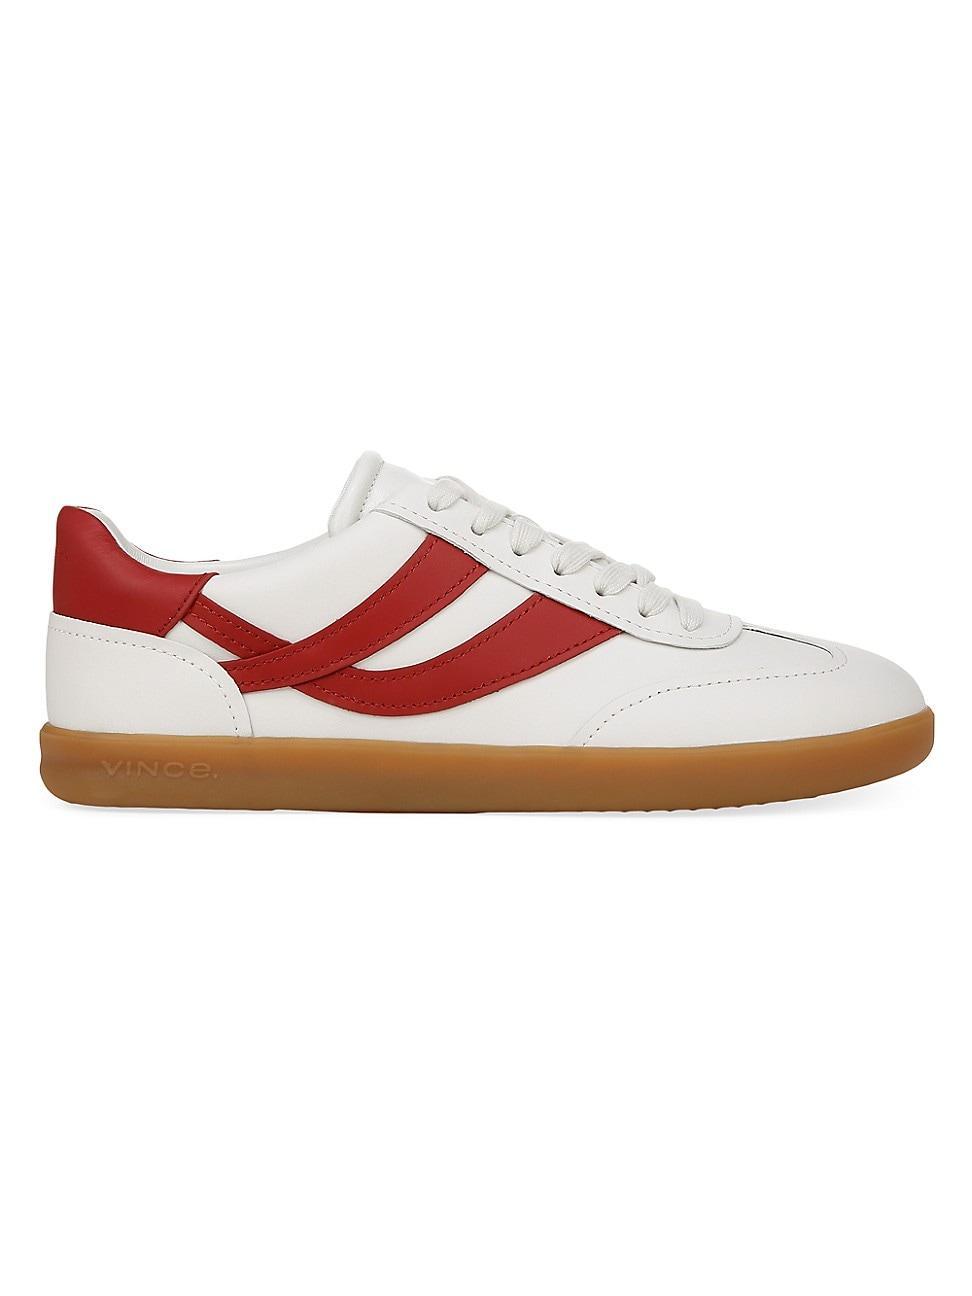 Vince Oasis Sneaker Product Image